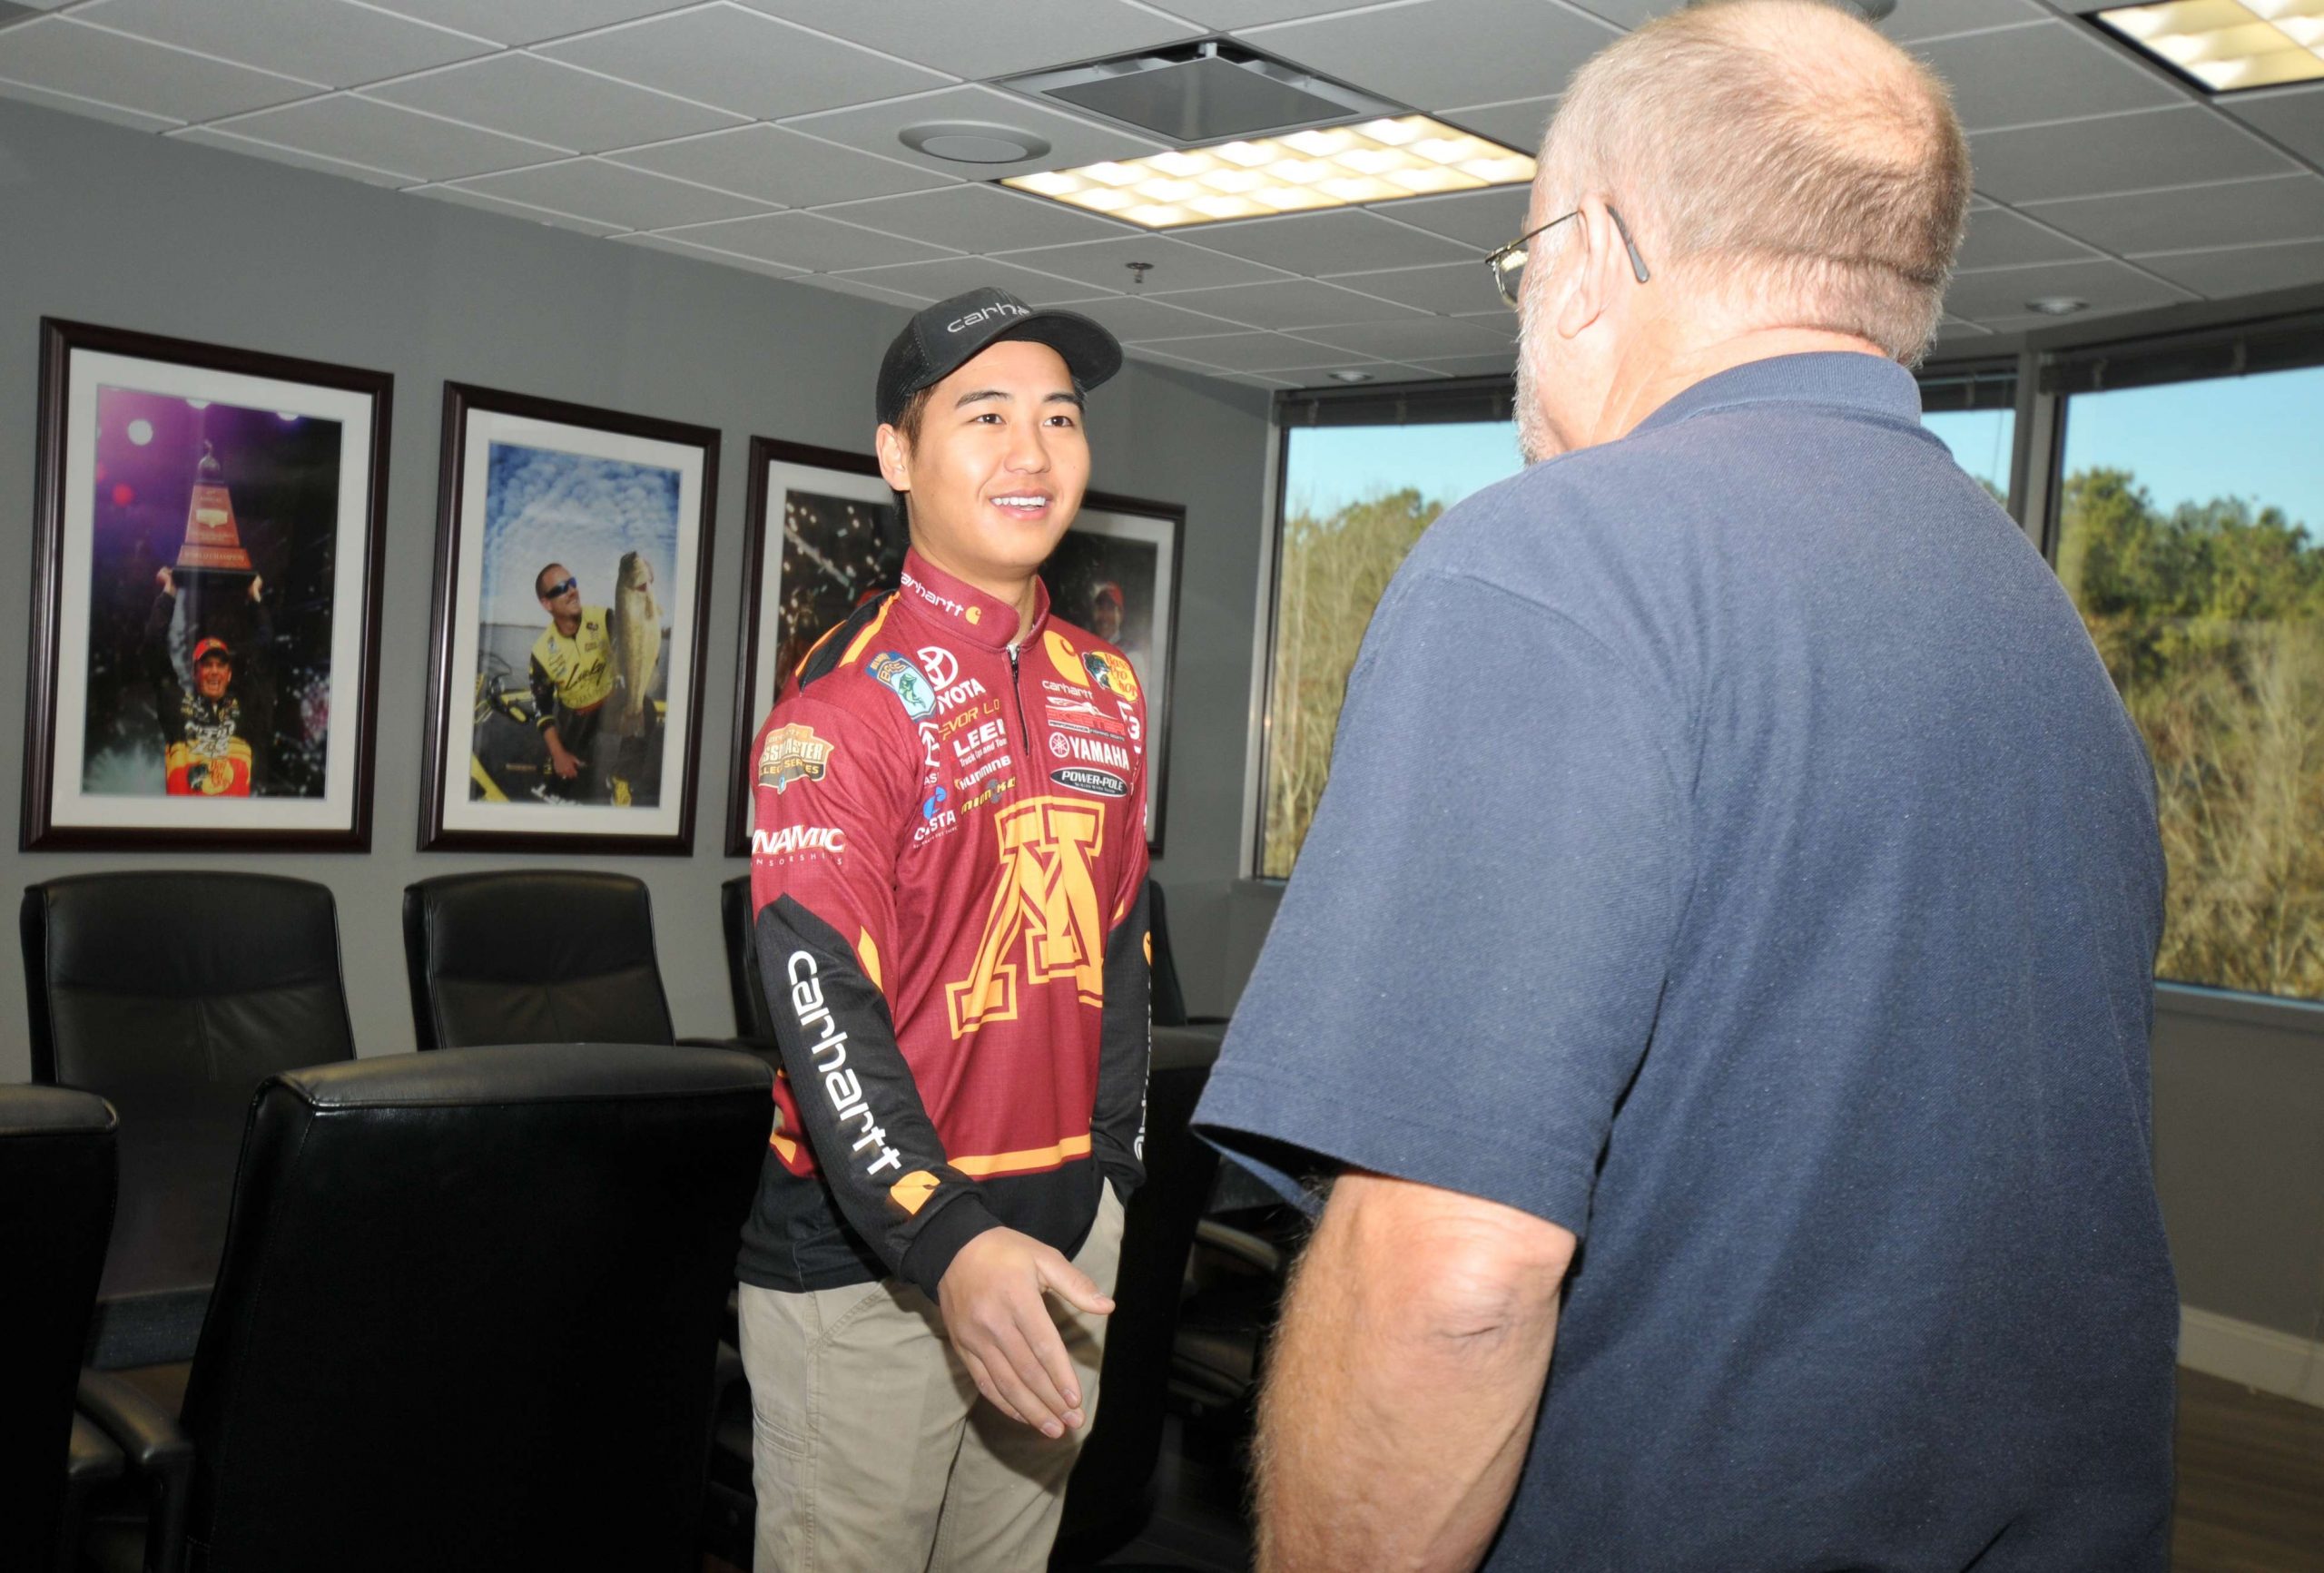 He was on his way from his home in Minnesota to the first Bass Pro Shops Bassmaster Open of the year in Florida when he stopped in Birmingham, Ala., to meet the B.A.S.S. staff.